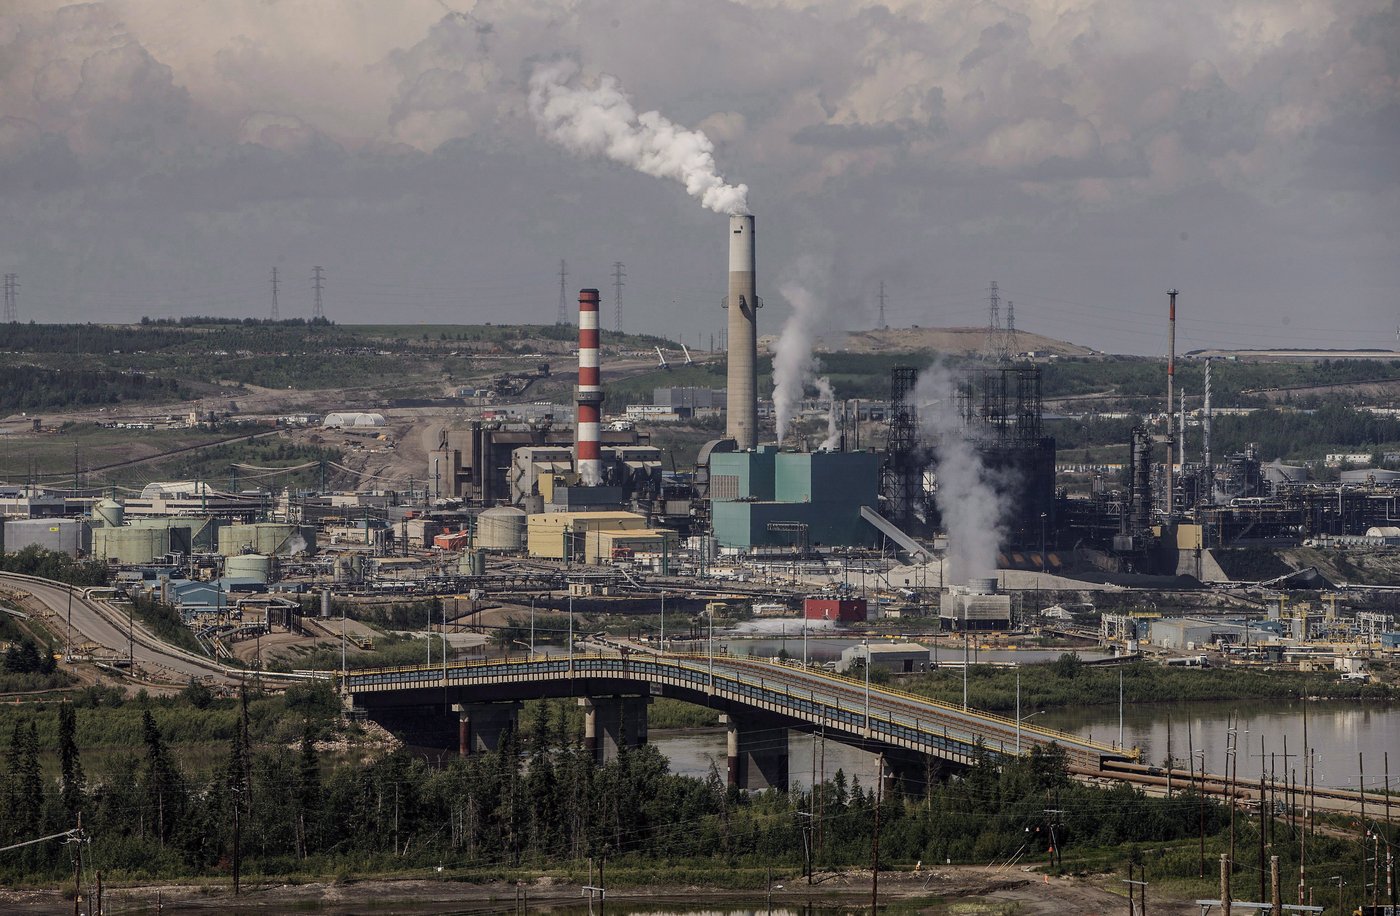 Oilsands emissions could be underestimated